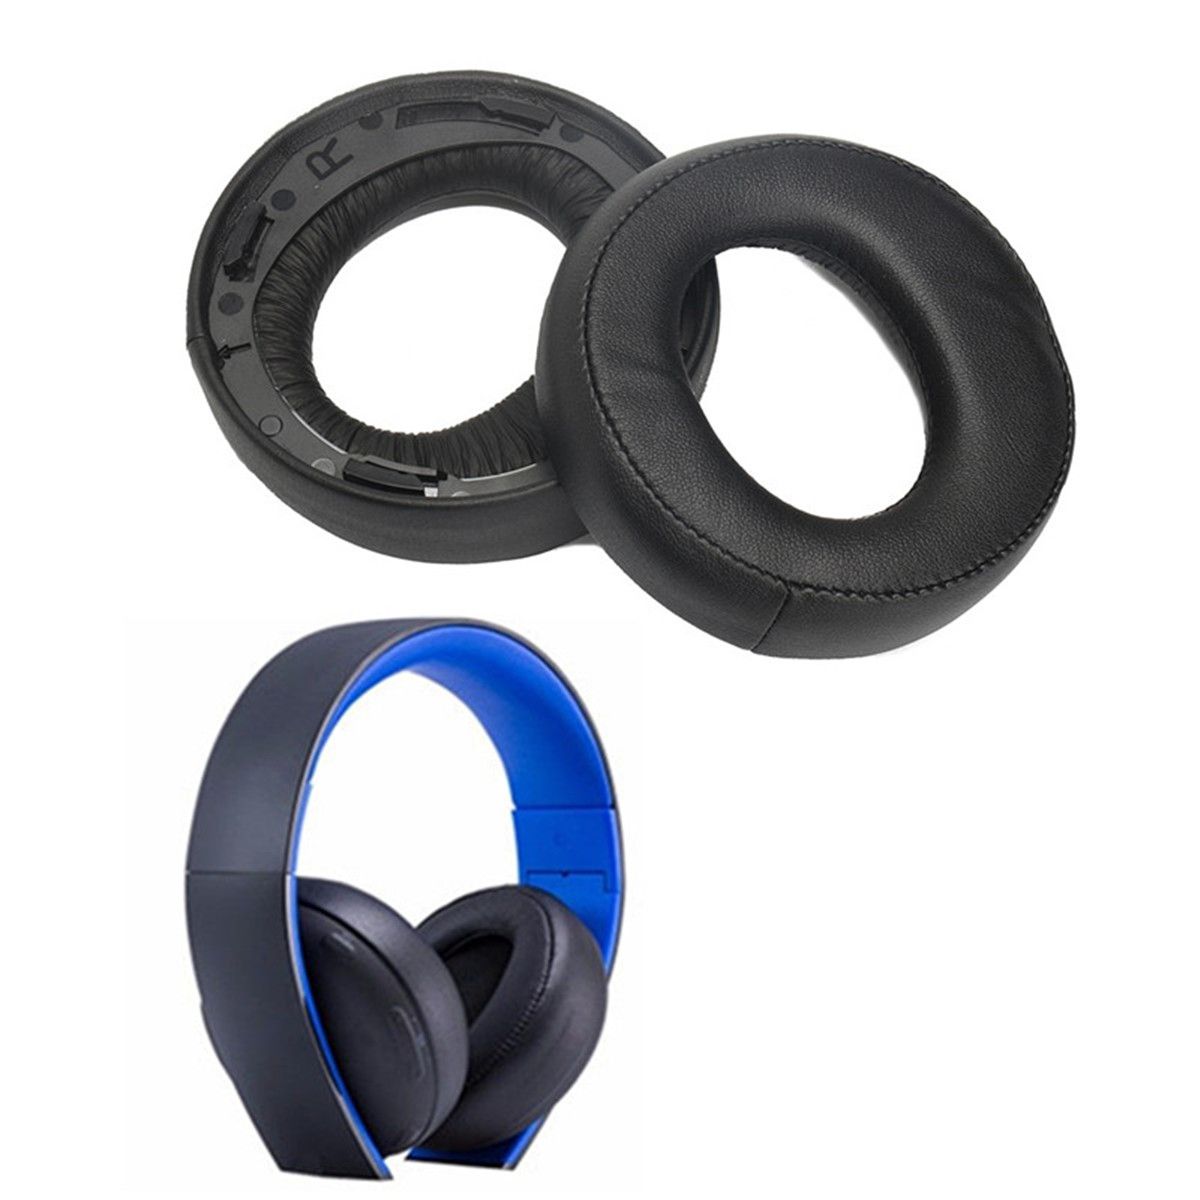 Earpad-Cushion-For-Sony-Blue-for-SONY-Gold-Wireless-Stereo-Headphone-Headset-PS3-PS4-71-L-R-1412687